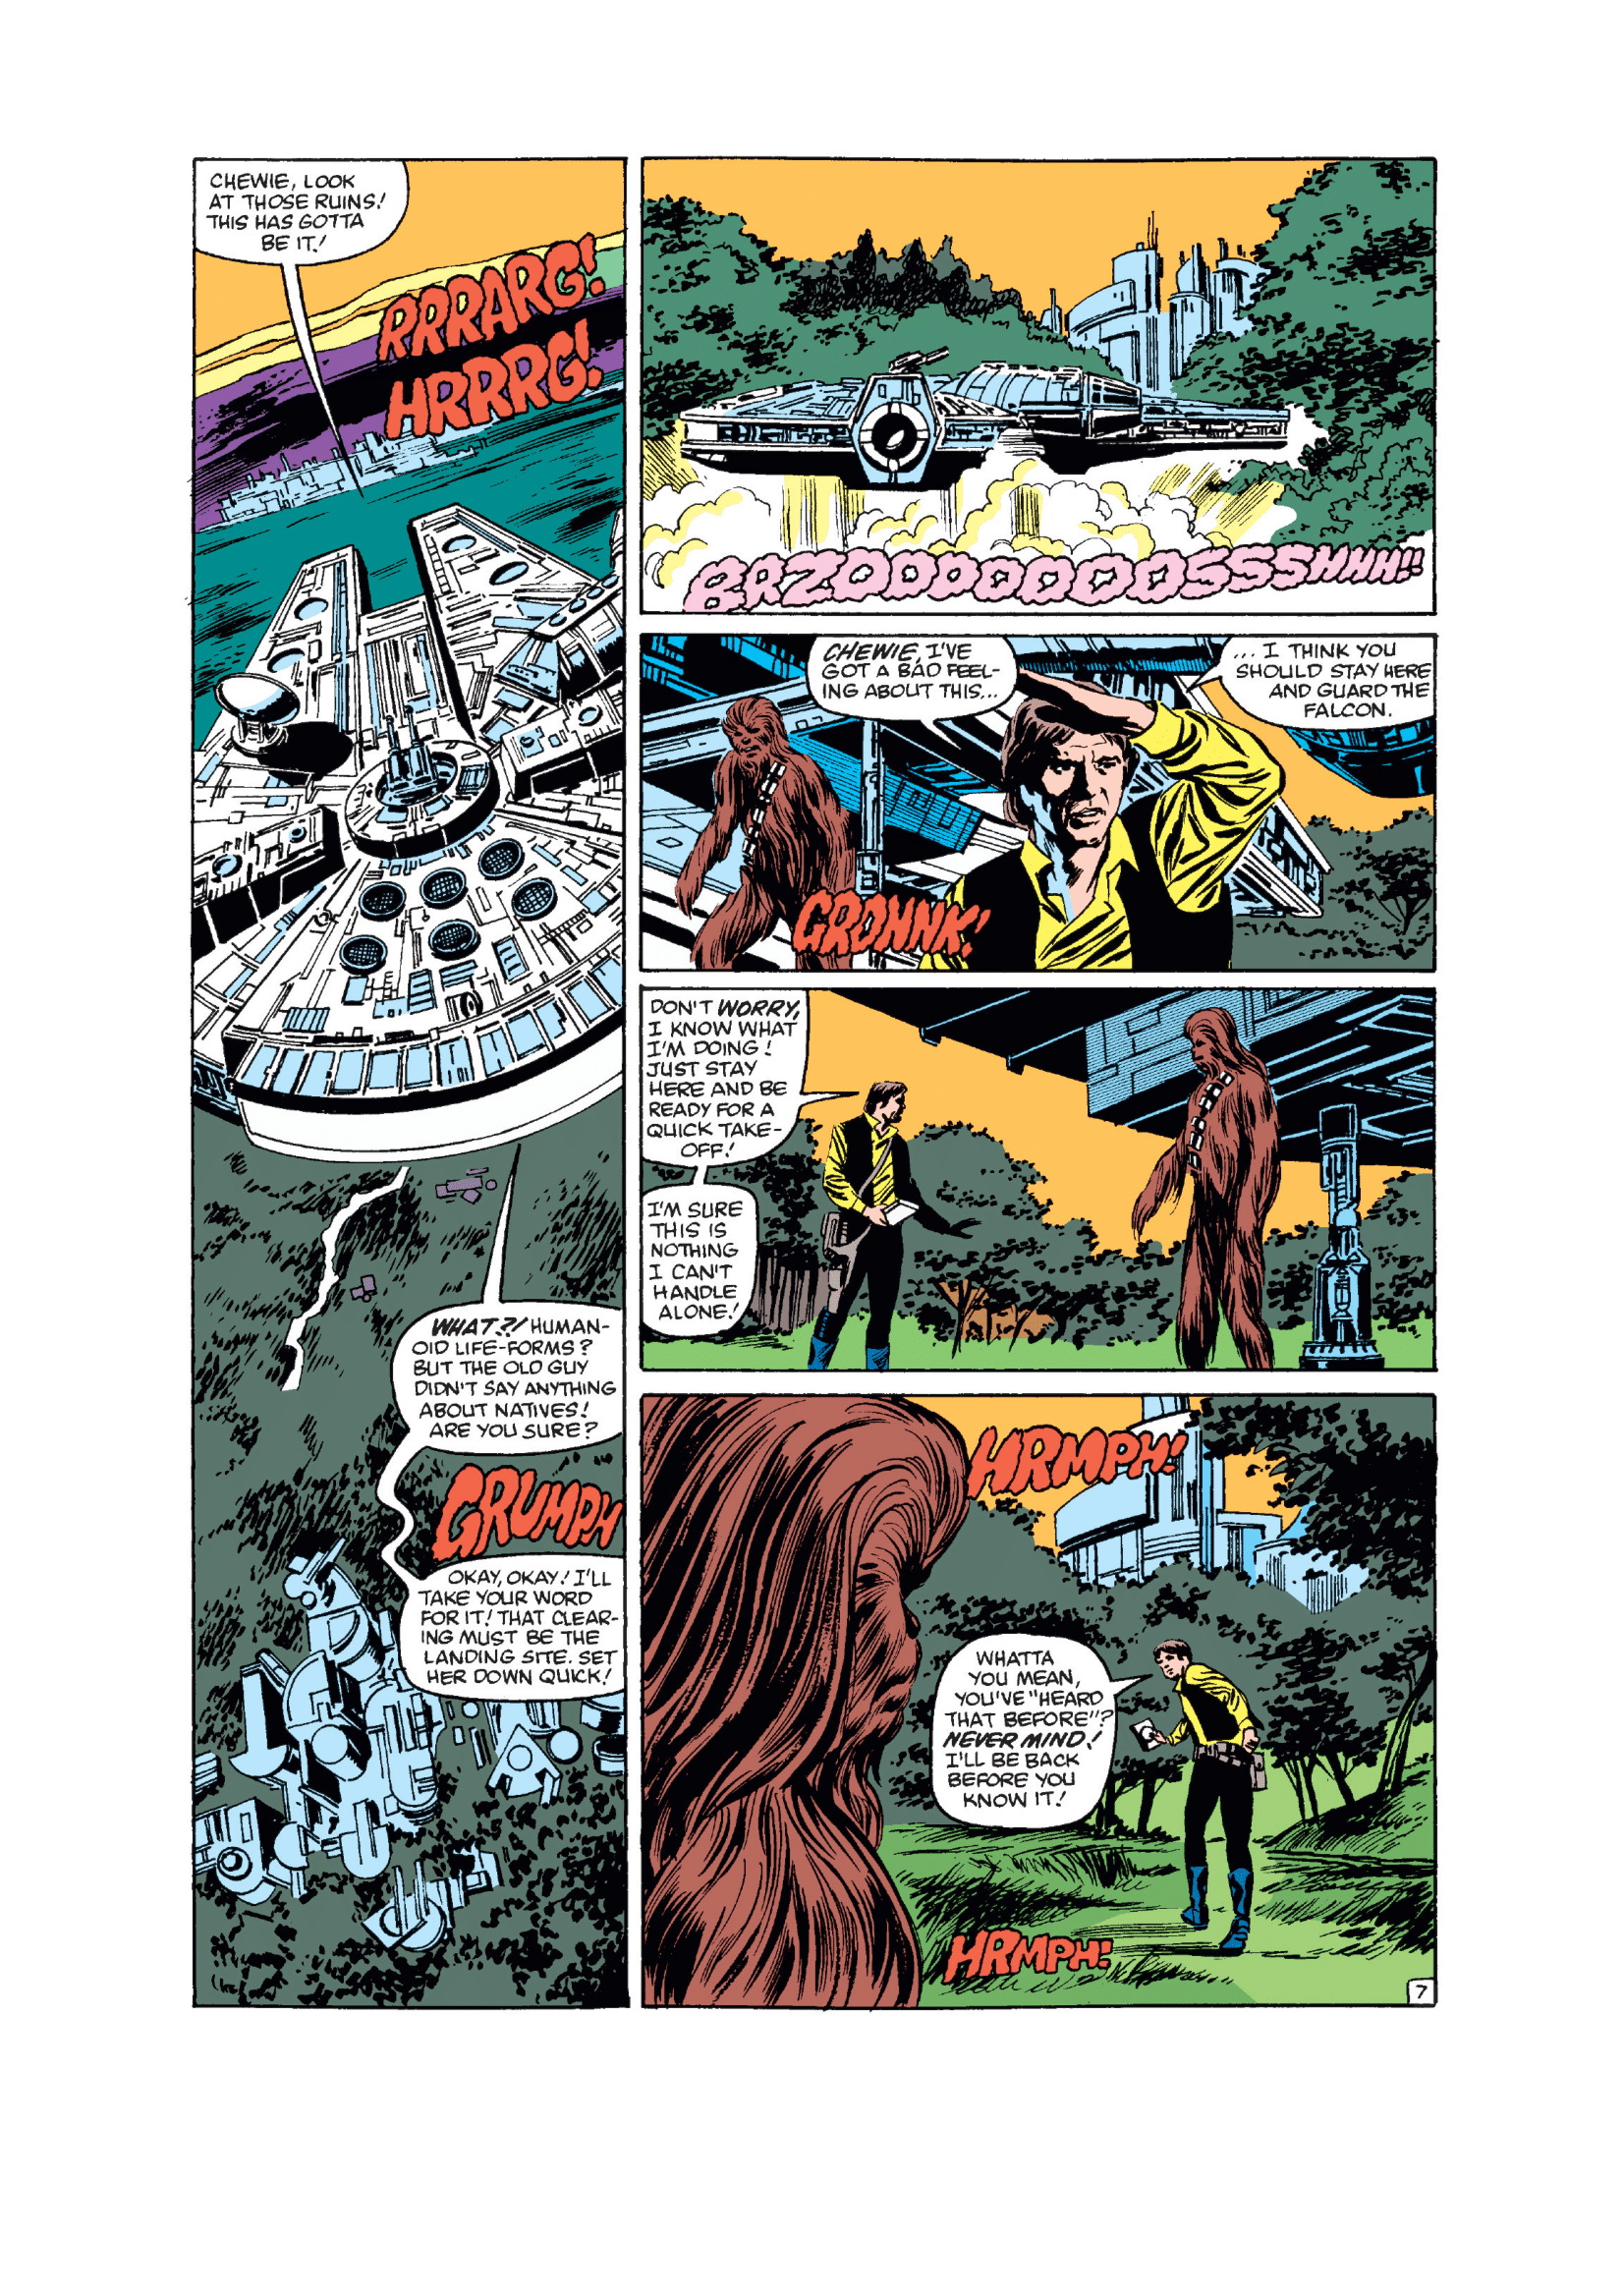 Star Wars (1977) Issue #_84 - Read Star Wars (1977) Issue #_84 comic online in high quality-16.png